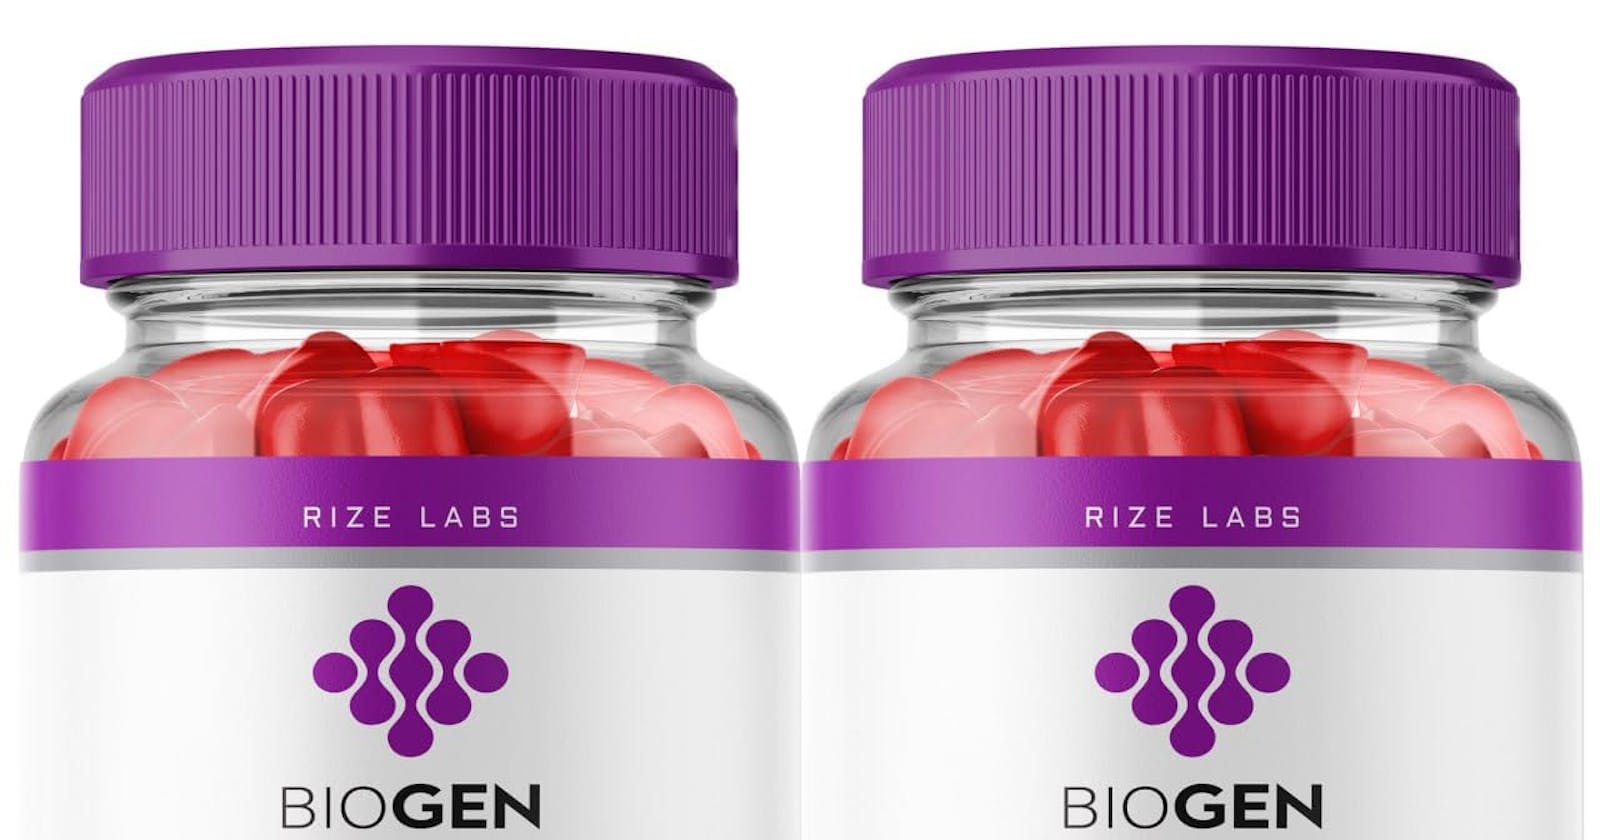 Biogen Keto ACV Gummies Reviews: Shocking Facts and Benefits Or Scam?